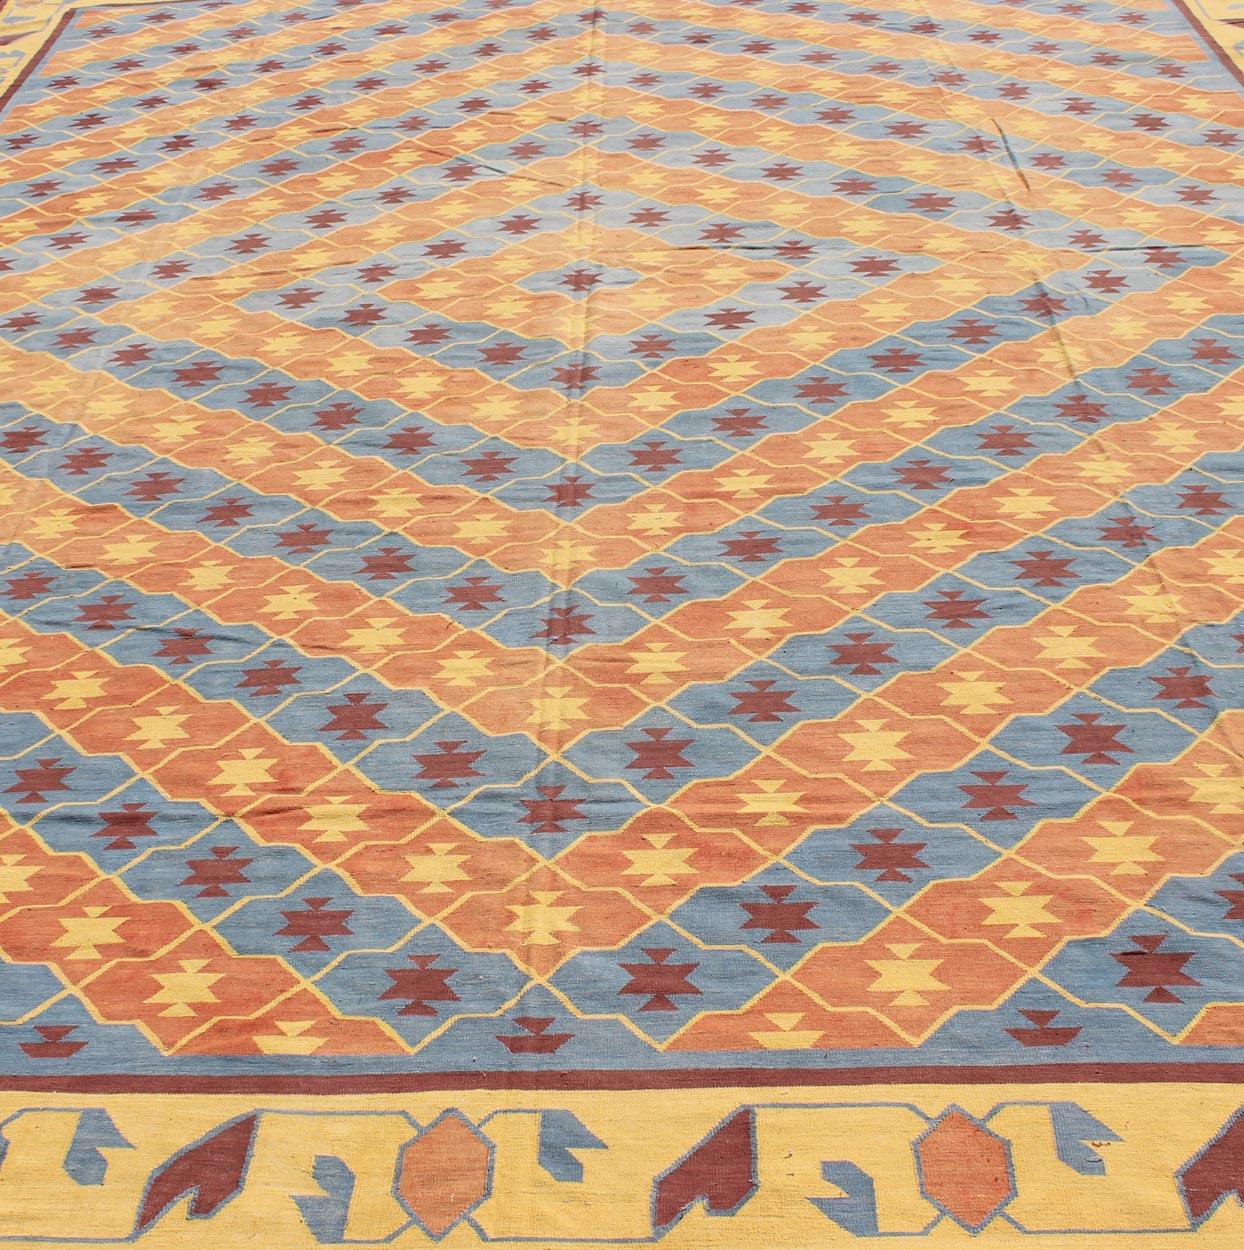 Wool Large Vintage Indian Cotton Dhurrie Flat-Weave Rug with Geometric Diamond Design For Sale